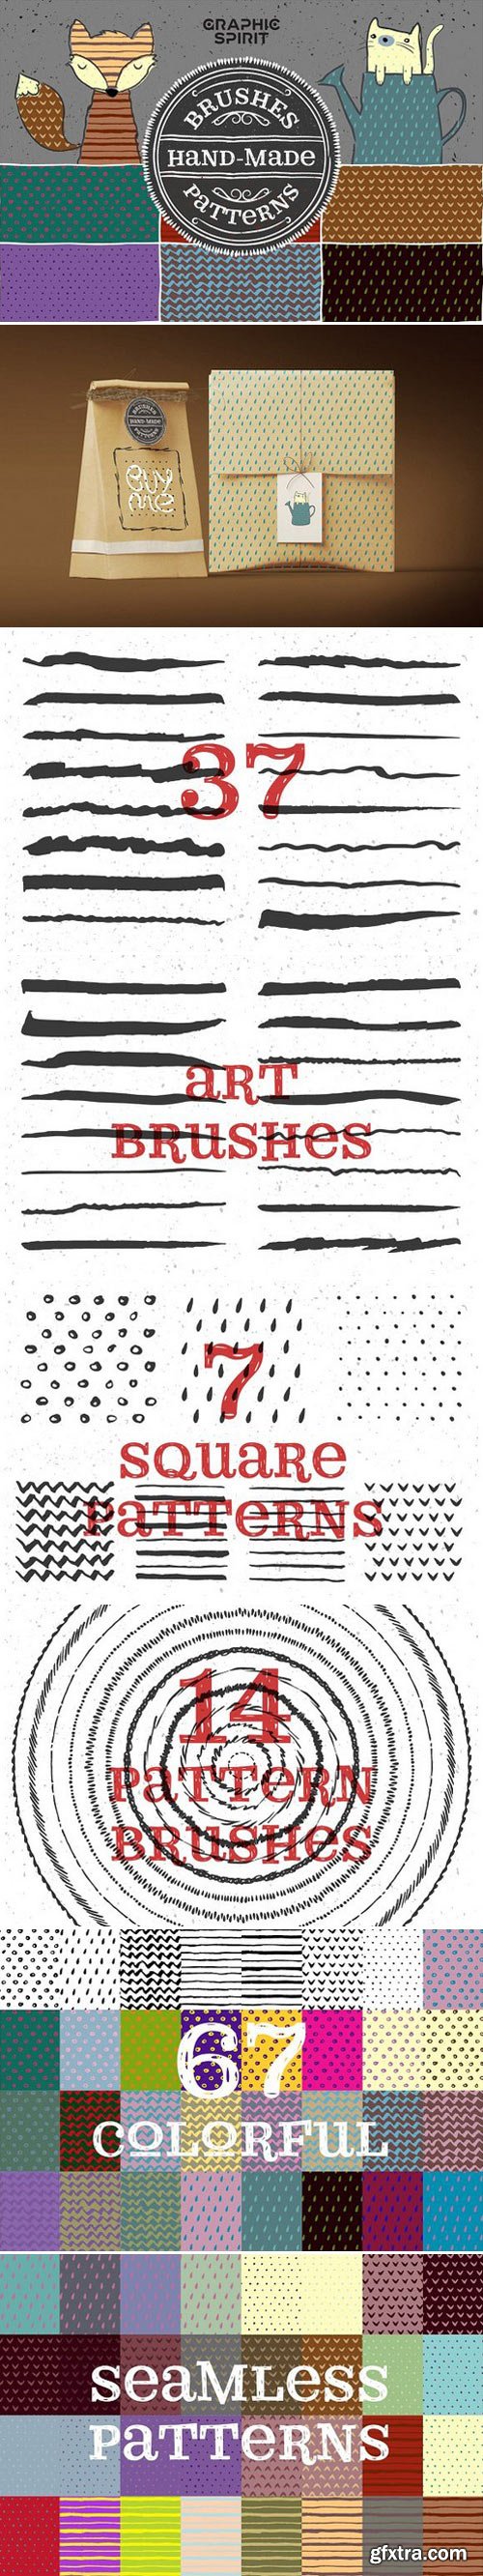 CM - Hand Made Brushes & Patterns 751383